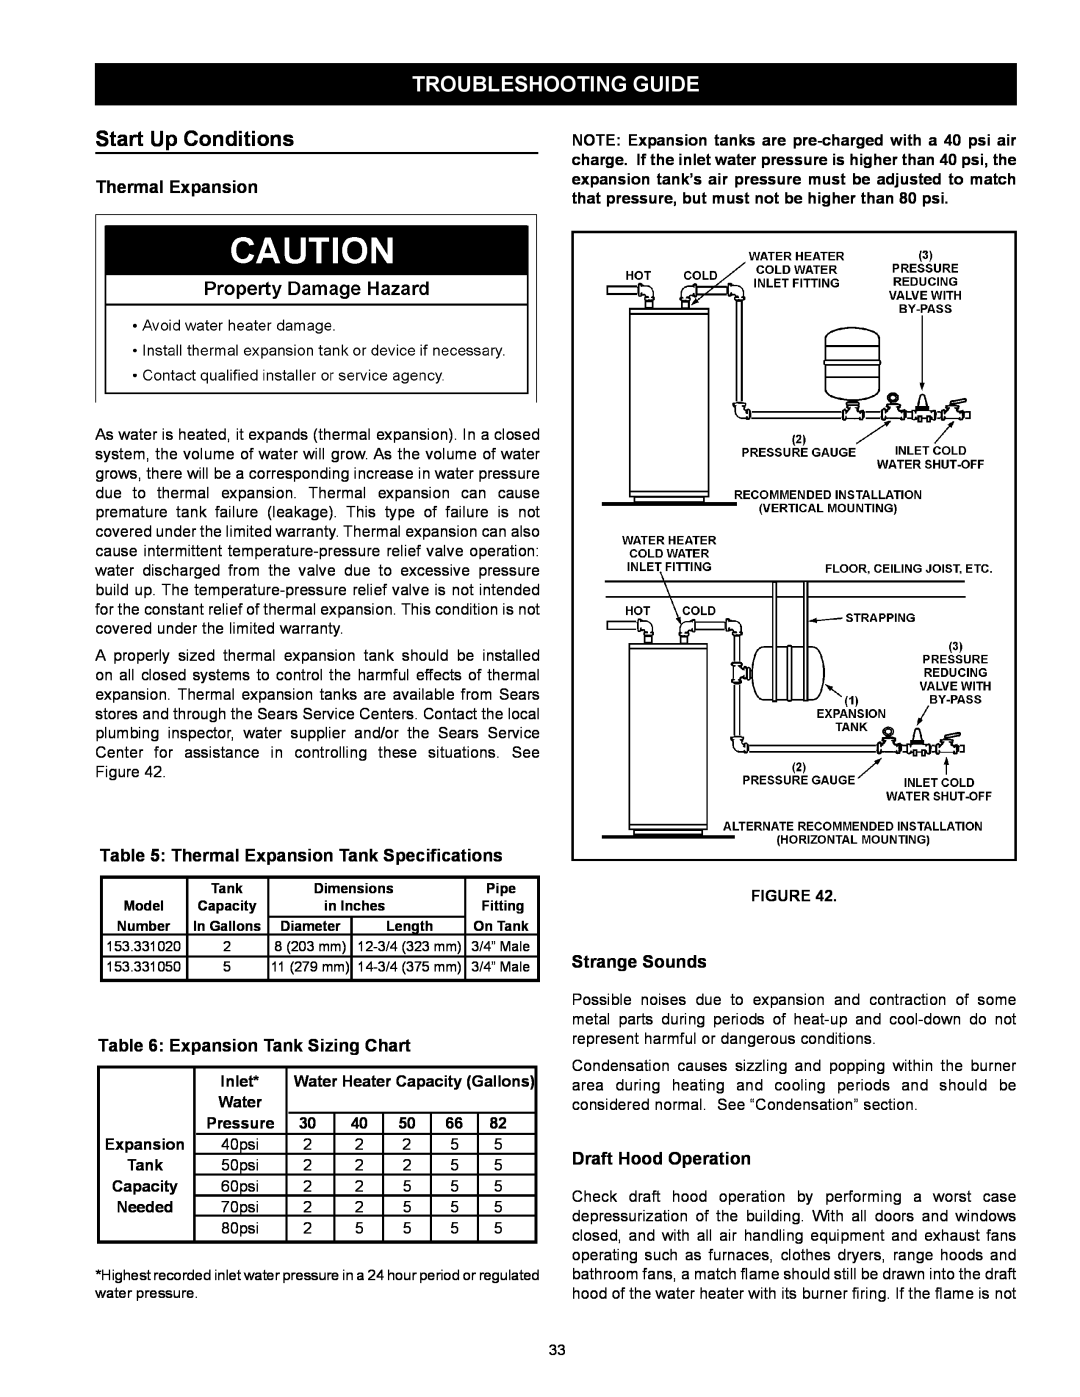 Kenmore 153.332.410 Troubleshooting Guide, Start Up Conditions, Thermal Expansion Tank Specifications, Strange Sounds 